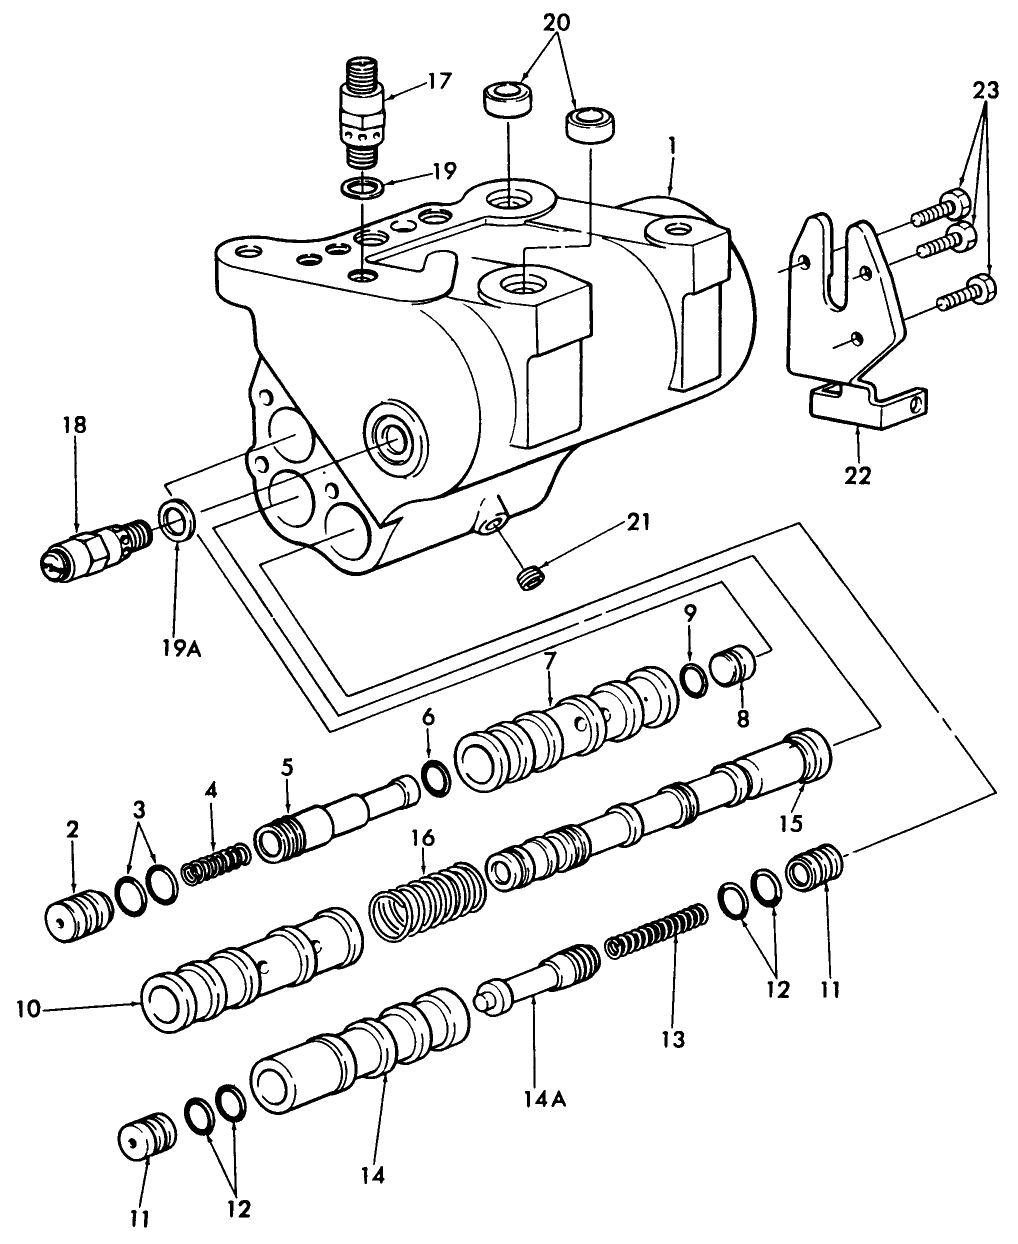 05A03 HYDRAULIC LIFT CYLINDER & RELATED PARTS